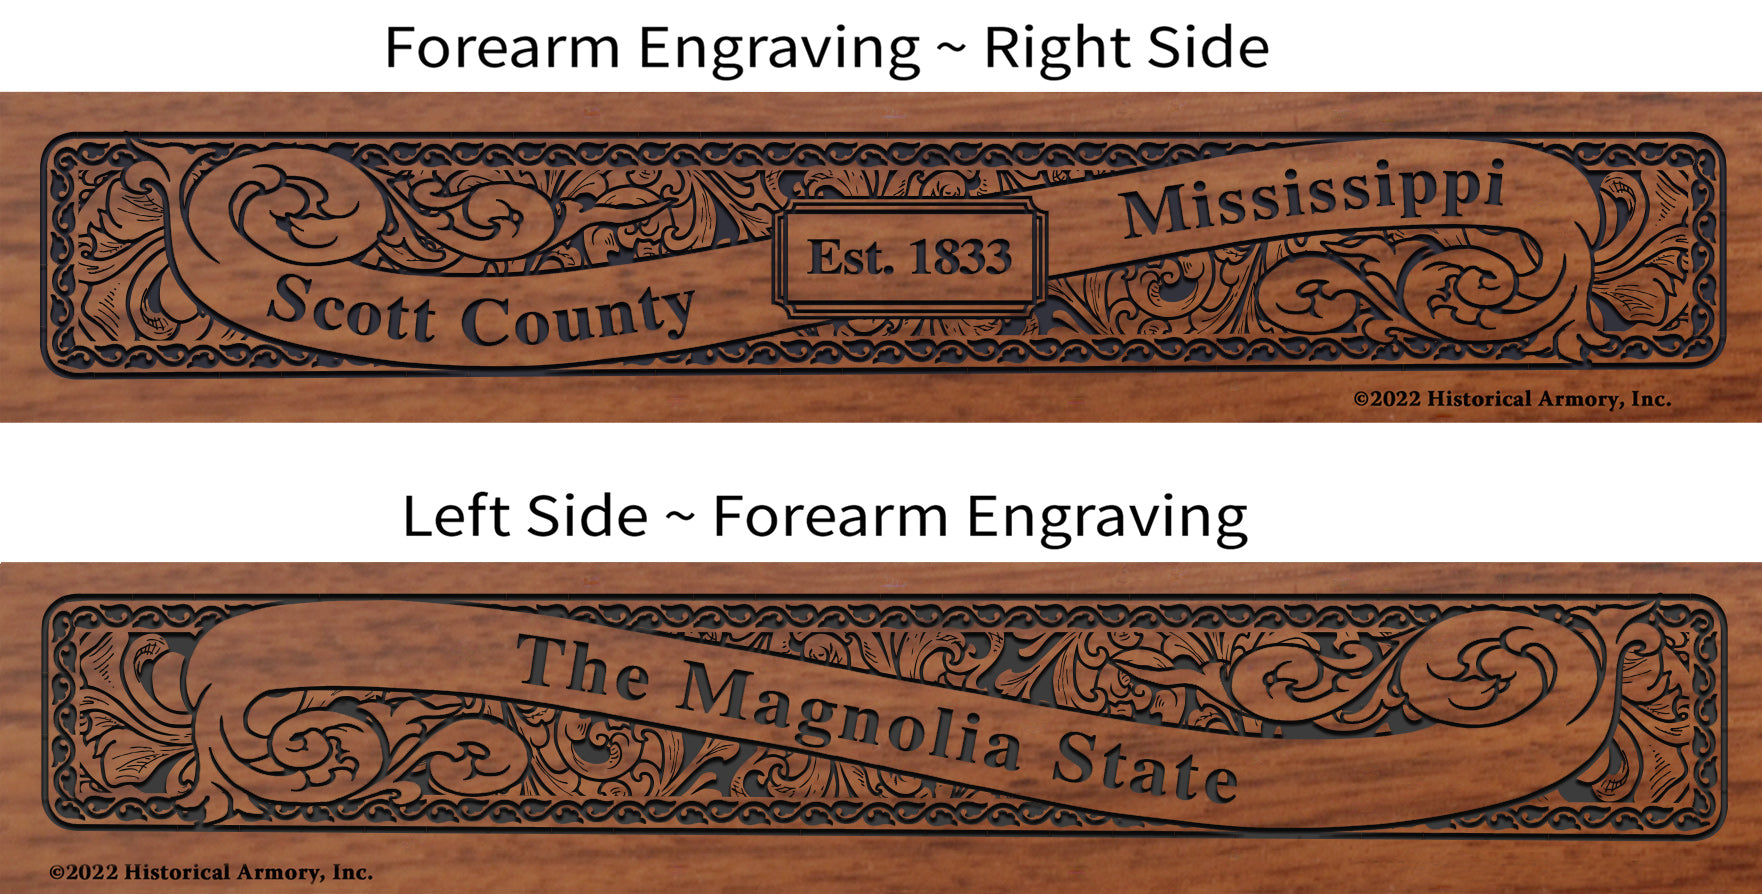 Scott County Mississippi Engraved Rifle Forearm